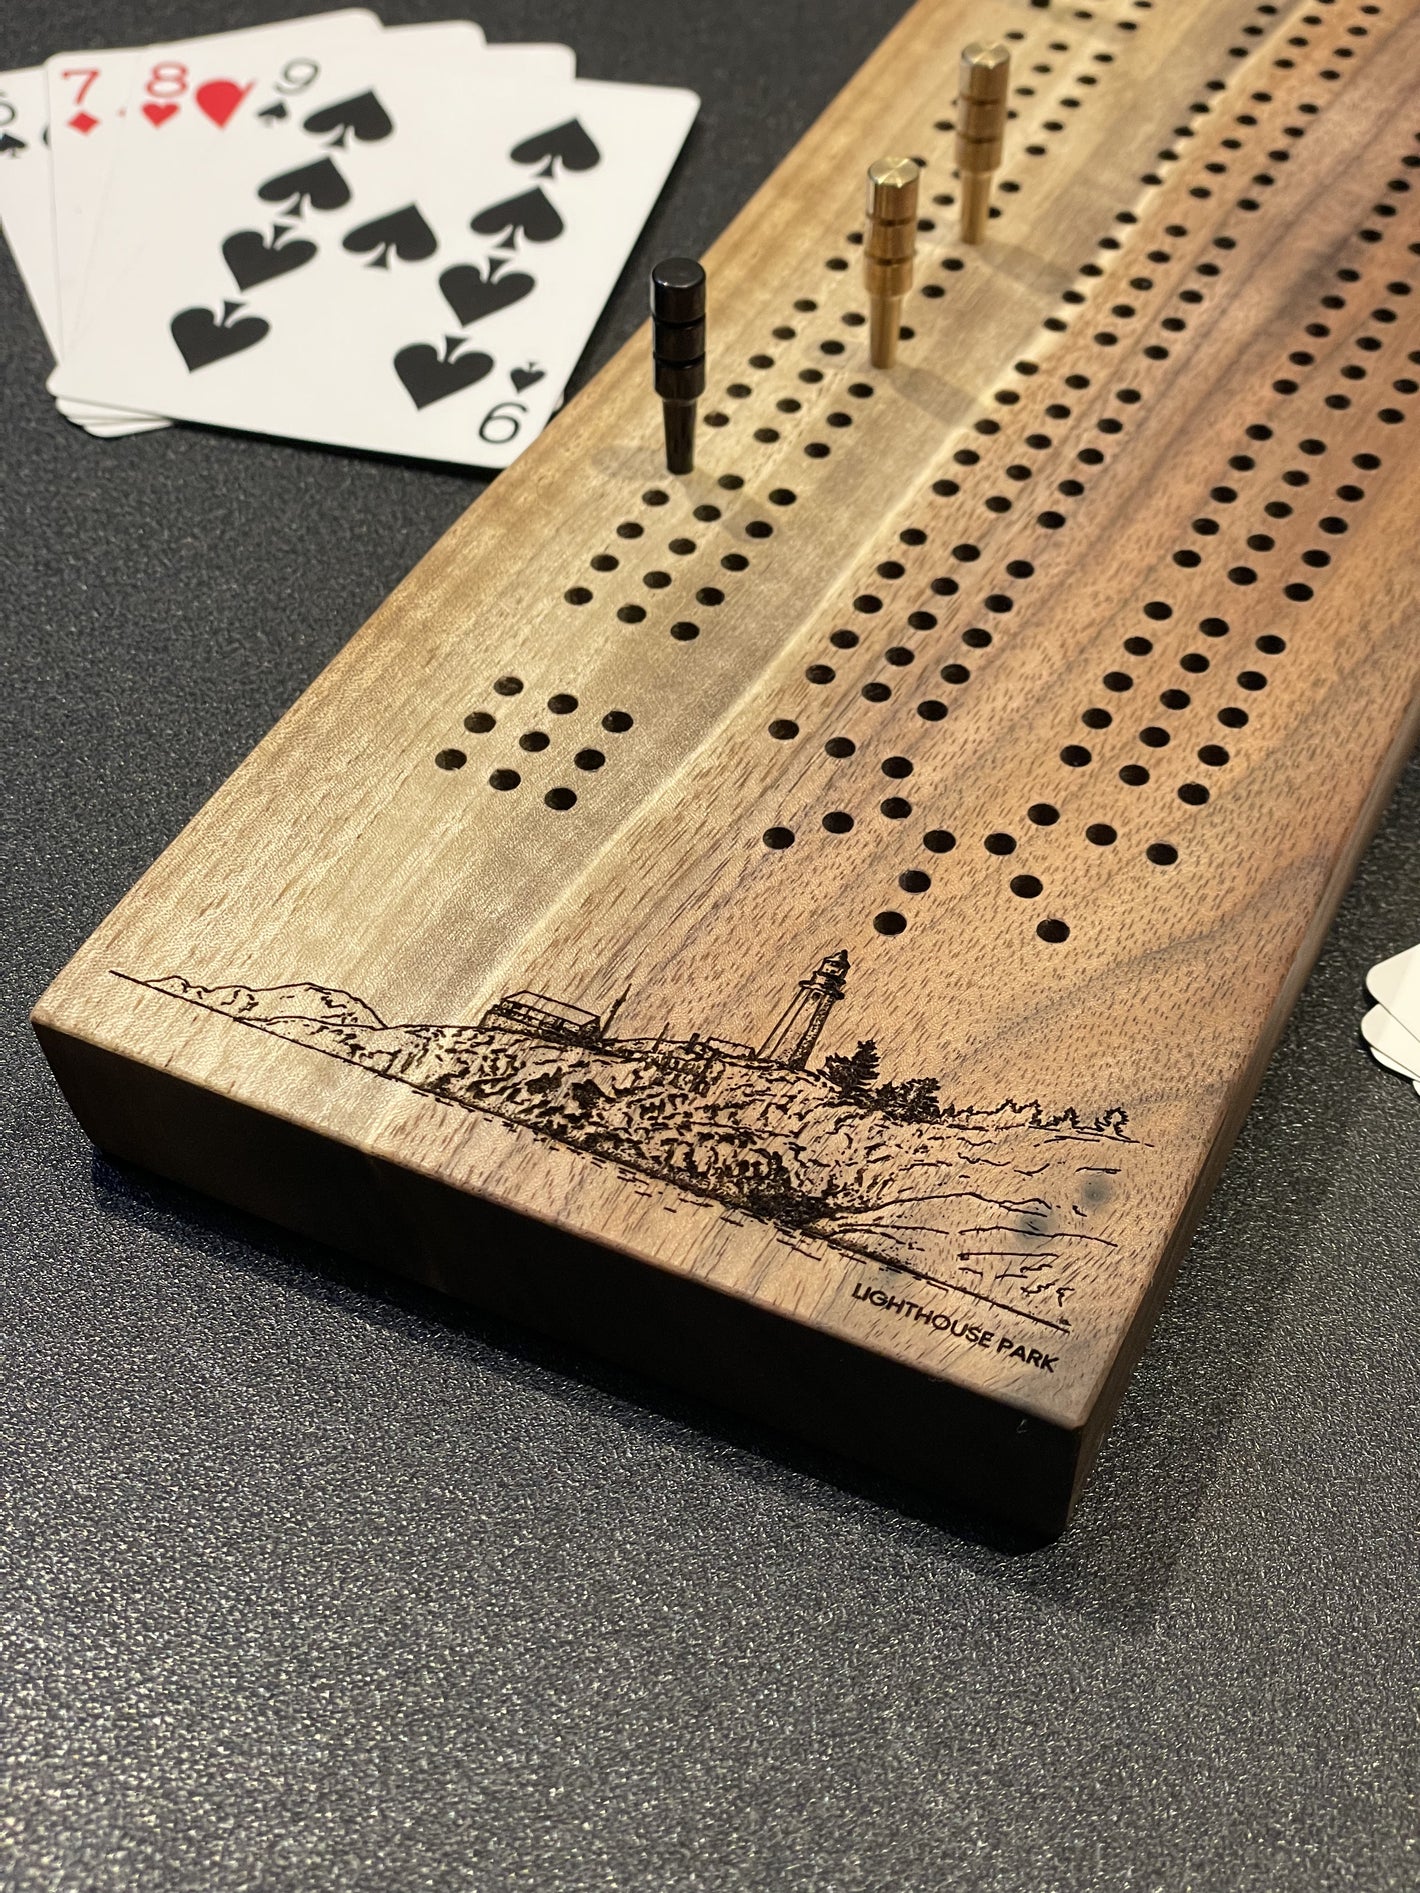 Walnut cribbage board engraved with Lighthouse Park, paired with high quality metal pegs. You can find this at Makers in Lonsdale and on www.tundra-designs.com.